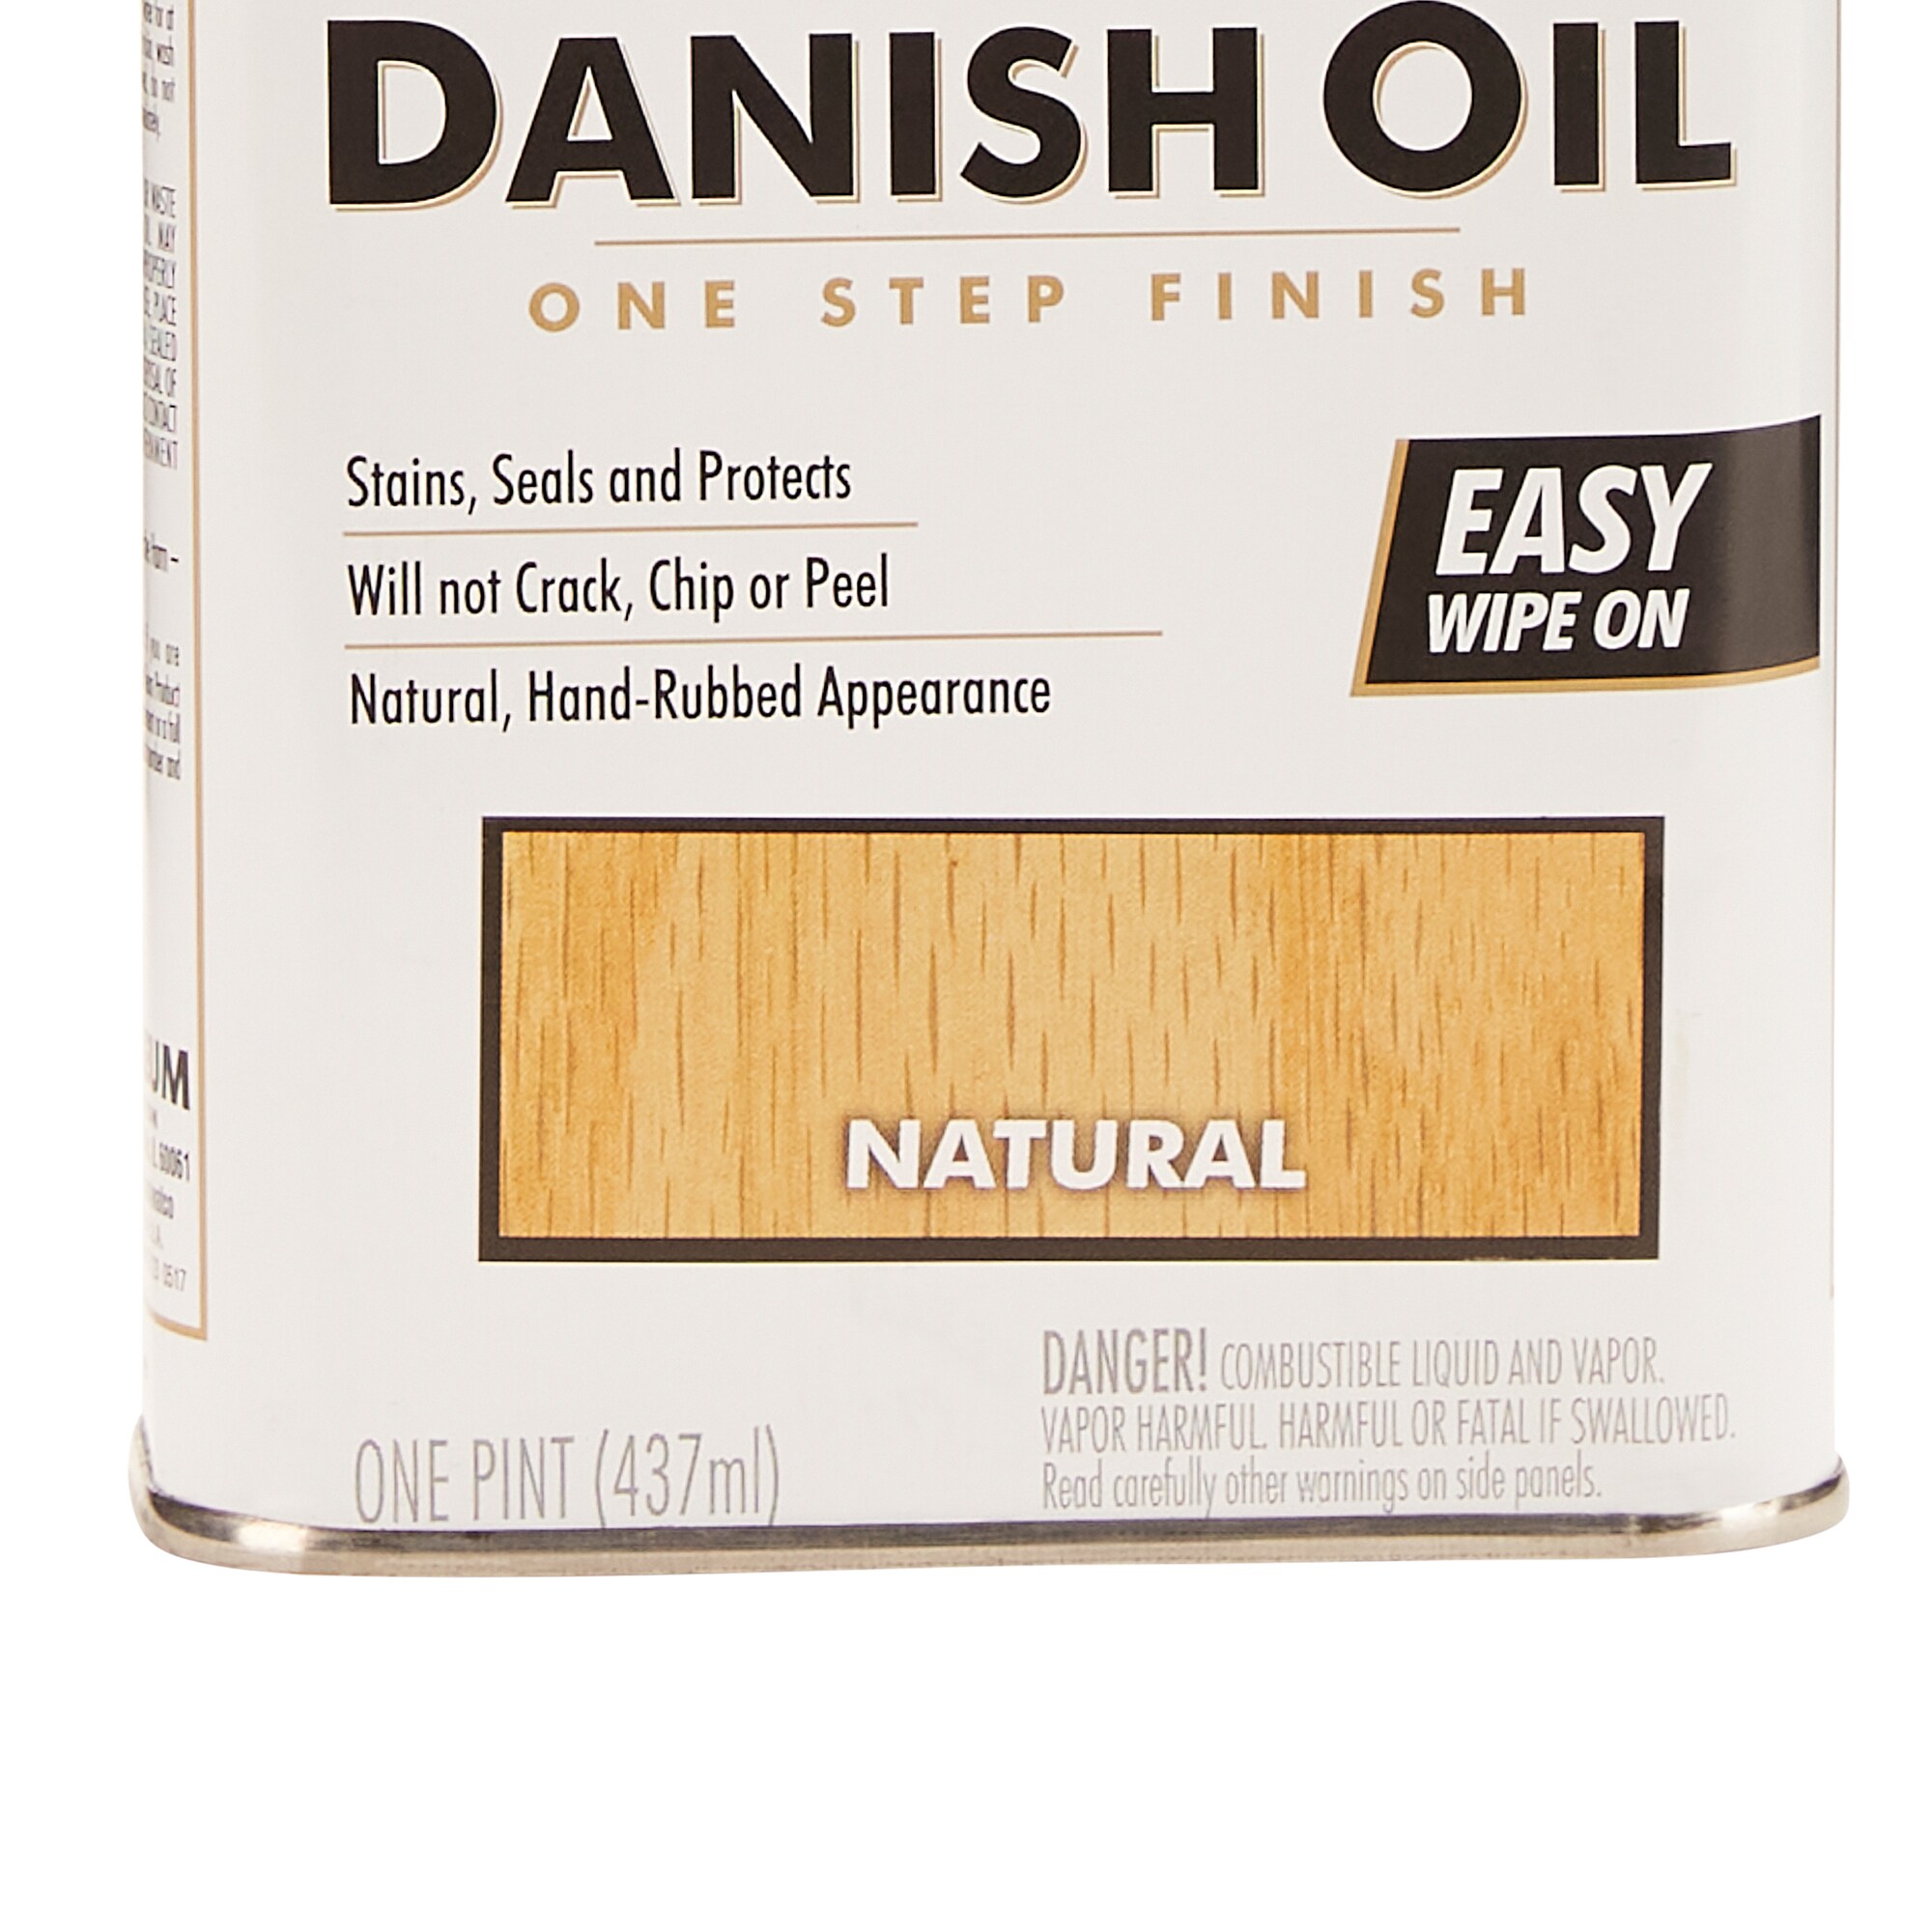 Watco Pint Danish Oil In Natural 265503 The Home Depot, 41% OFF